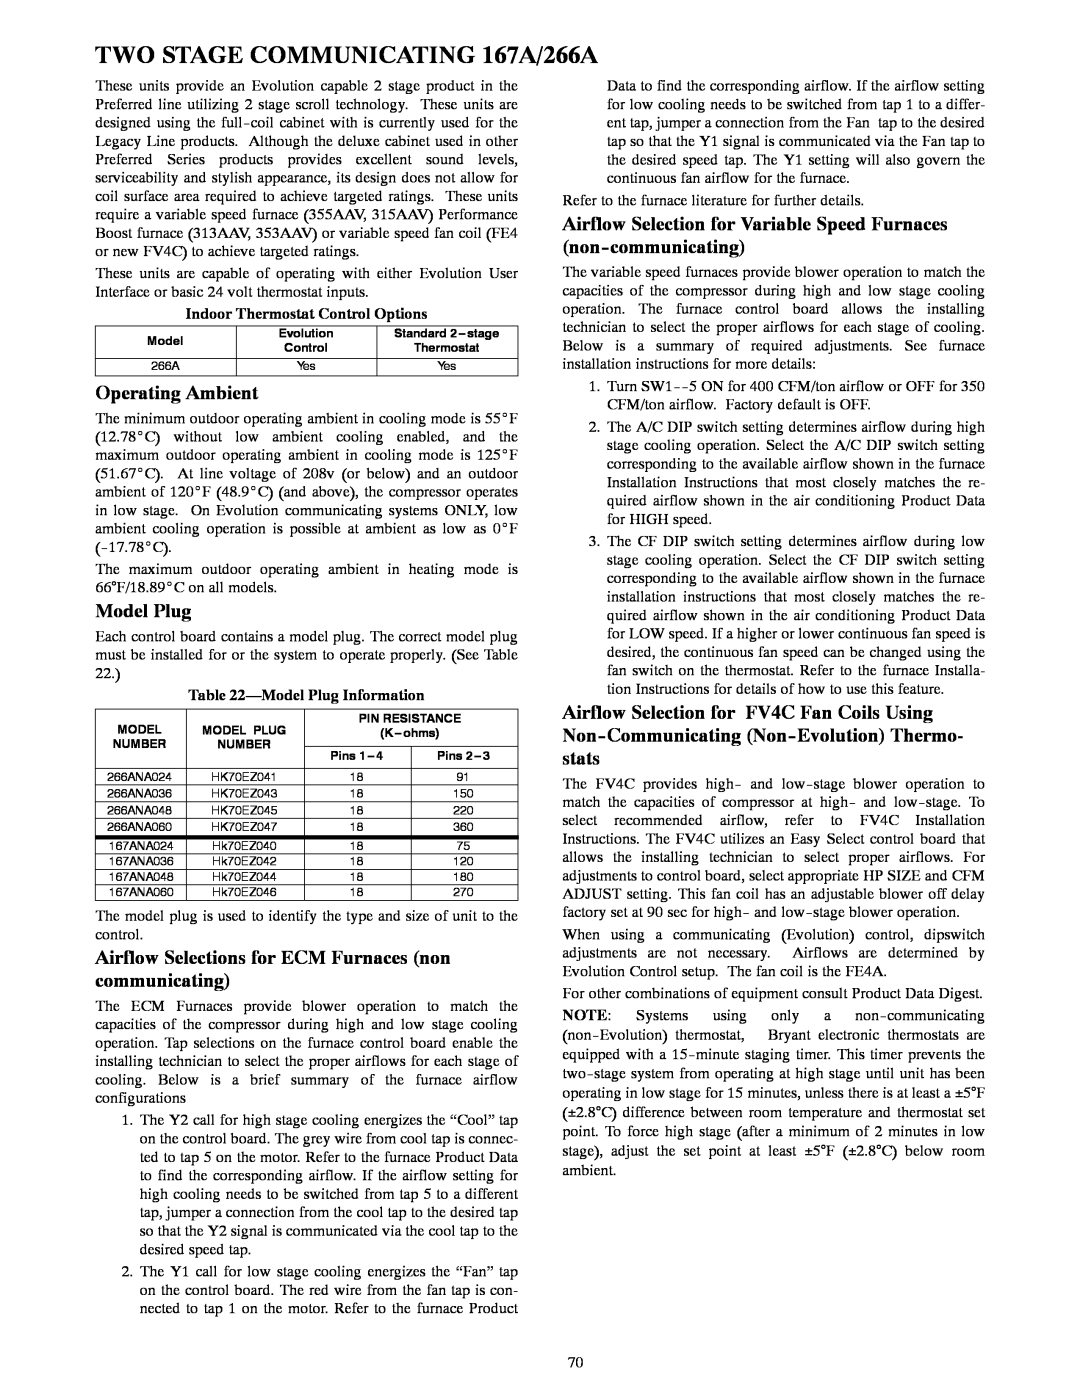 Bryant R-22 service manual TWO STAGE COMMUNICATING 167A/266A, Operating Ambient, Model Plug 